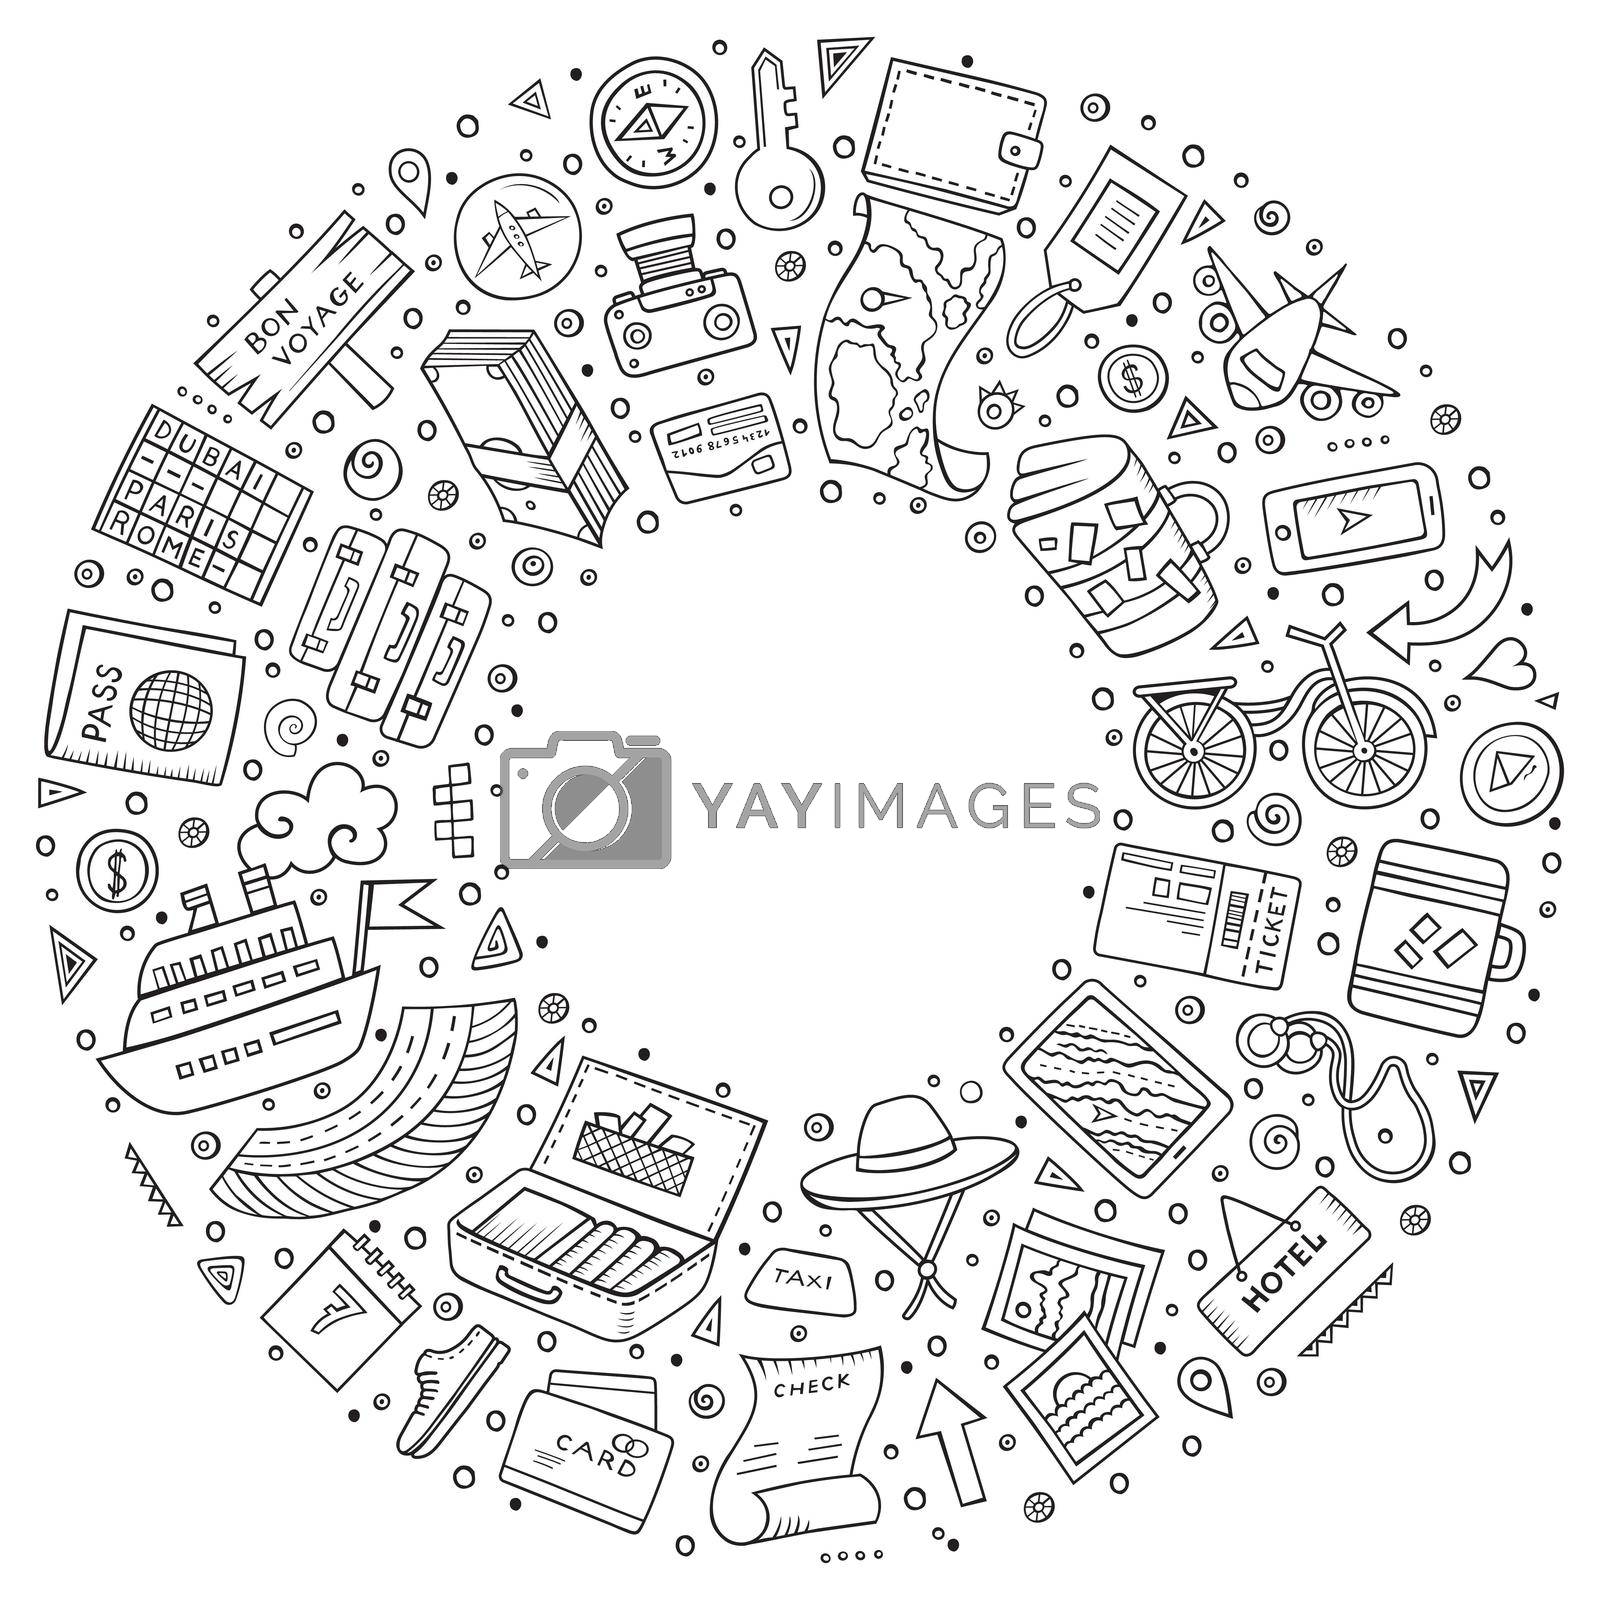 Royalty free image of Round frame Travel cartoon objects, symbols and items by balabolka